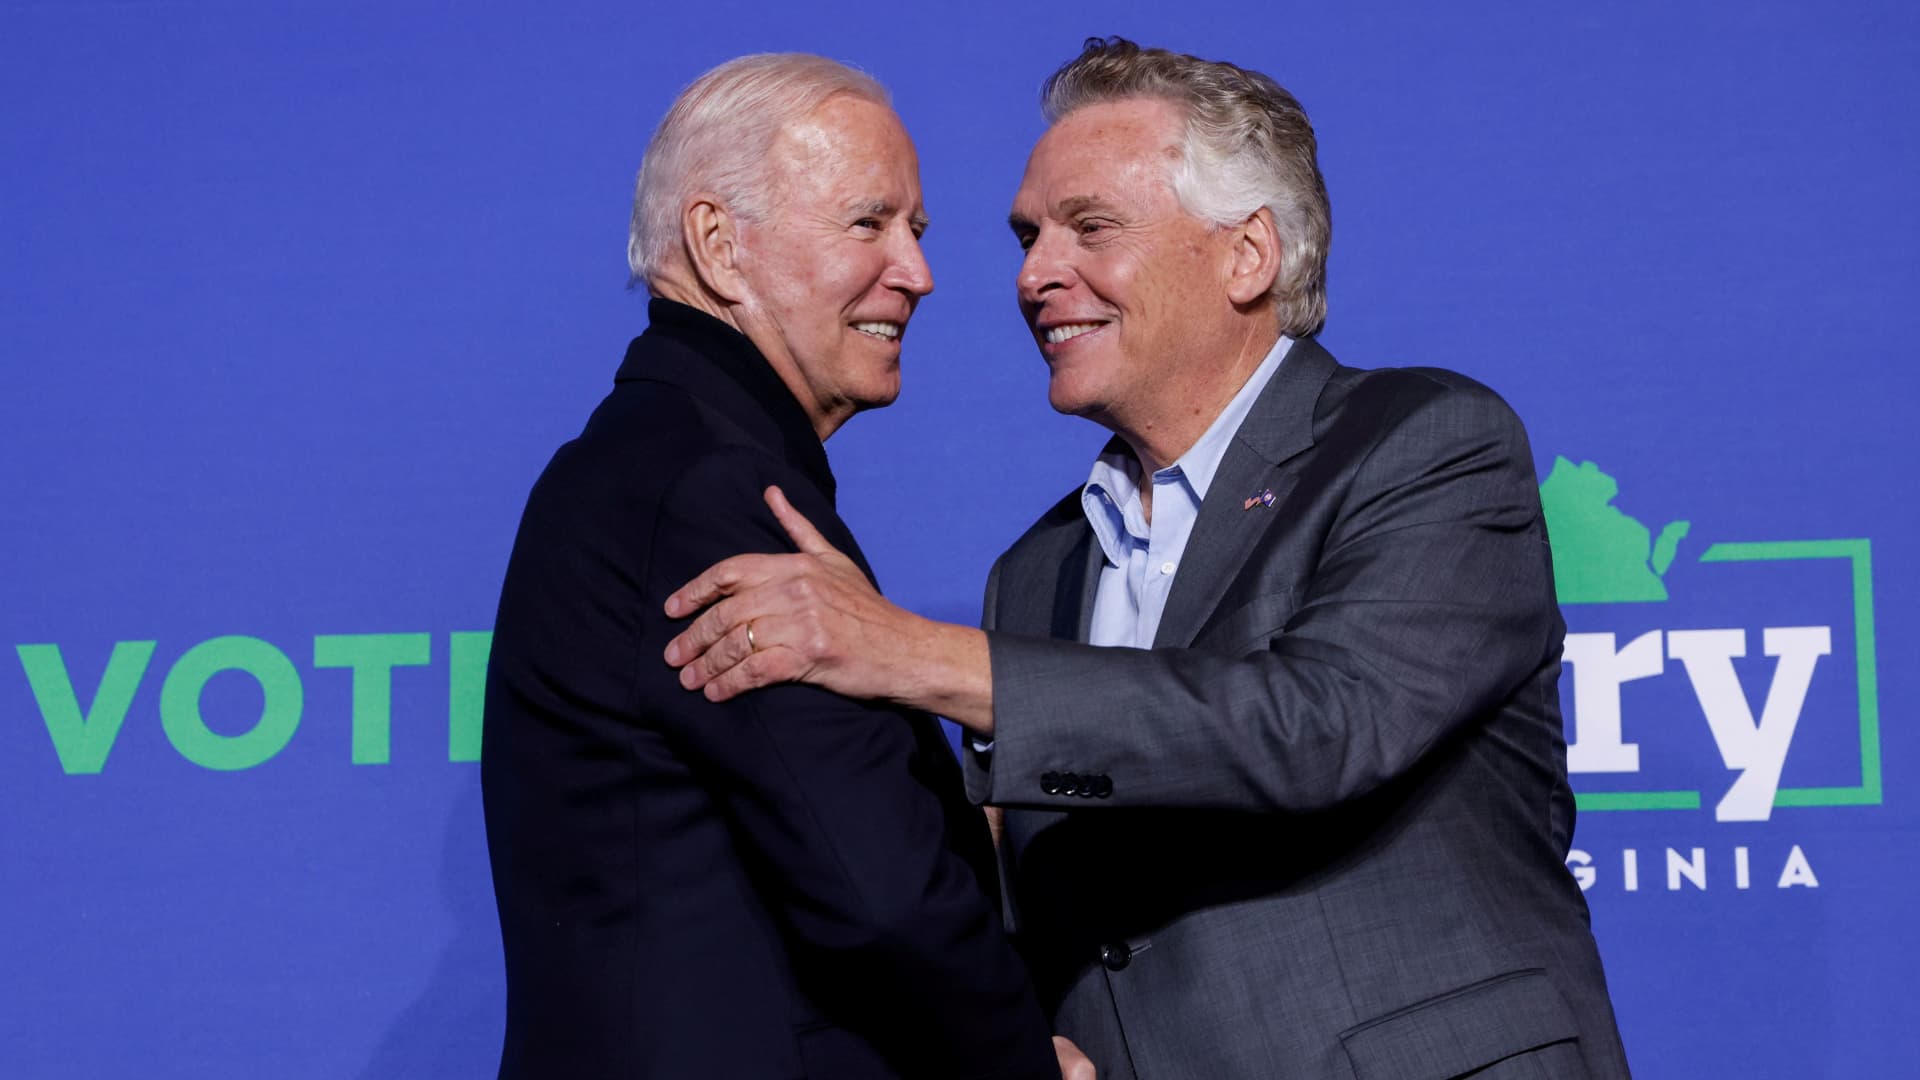 U.S. President Joe Biden and Democratic candidate for governor of Virginia Terry McAuliffe greet each other onstage at a rally in Arlington, Virginia, U.S. October 26, 2021.